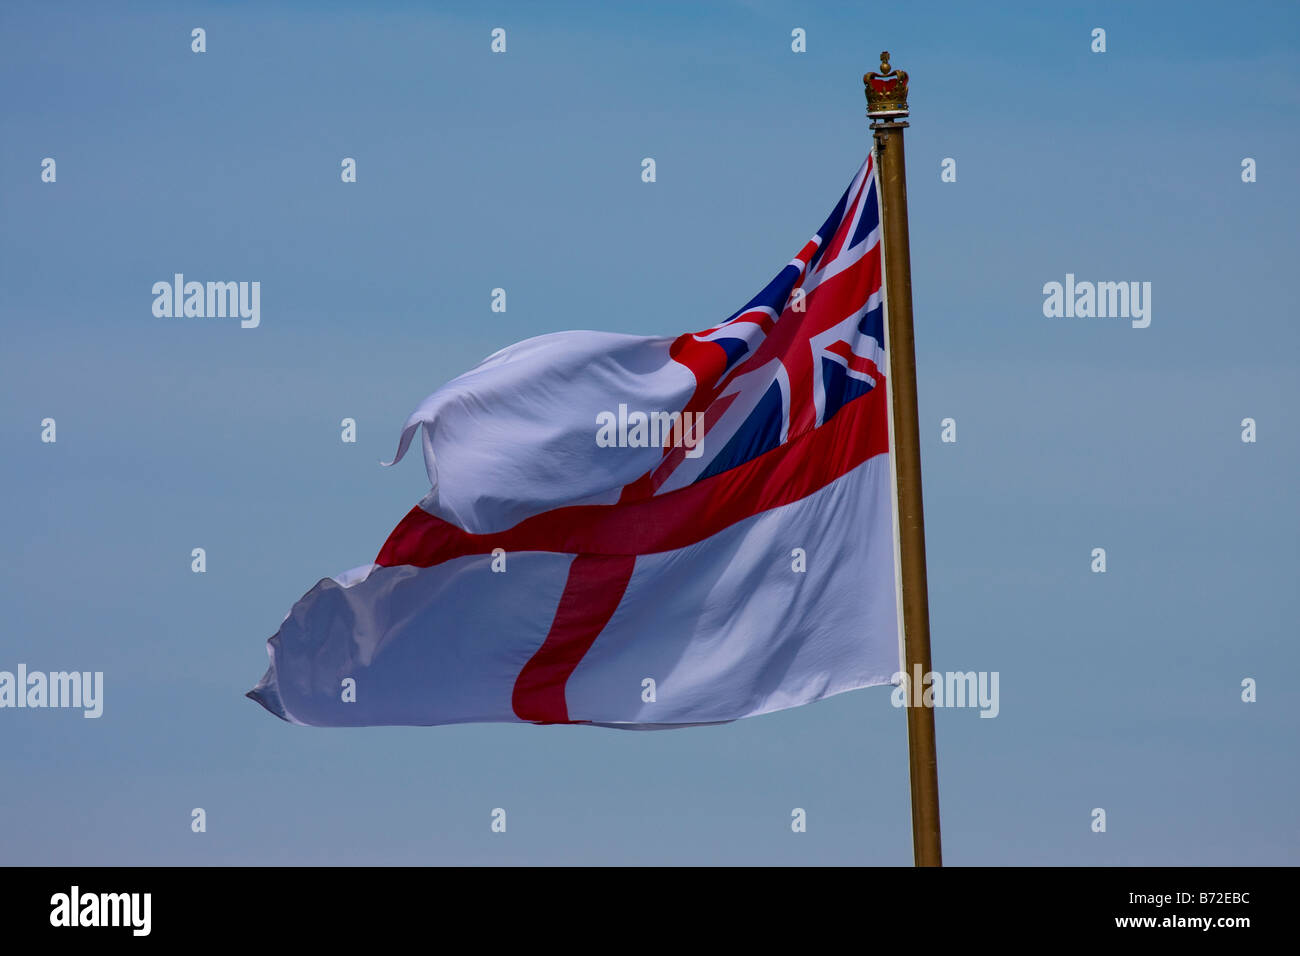 The White Ensign, flag of the British Royal Navy Stock Photo